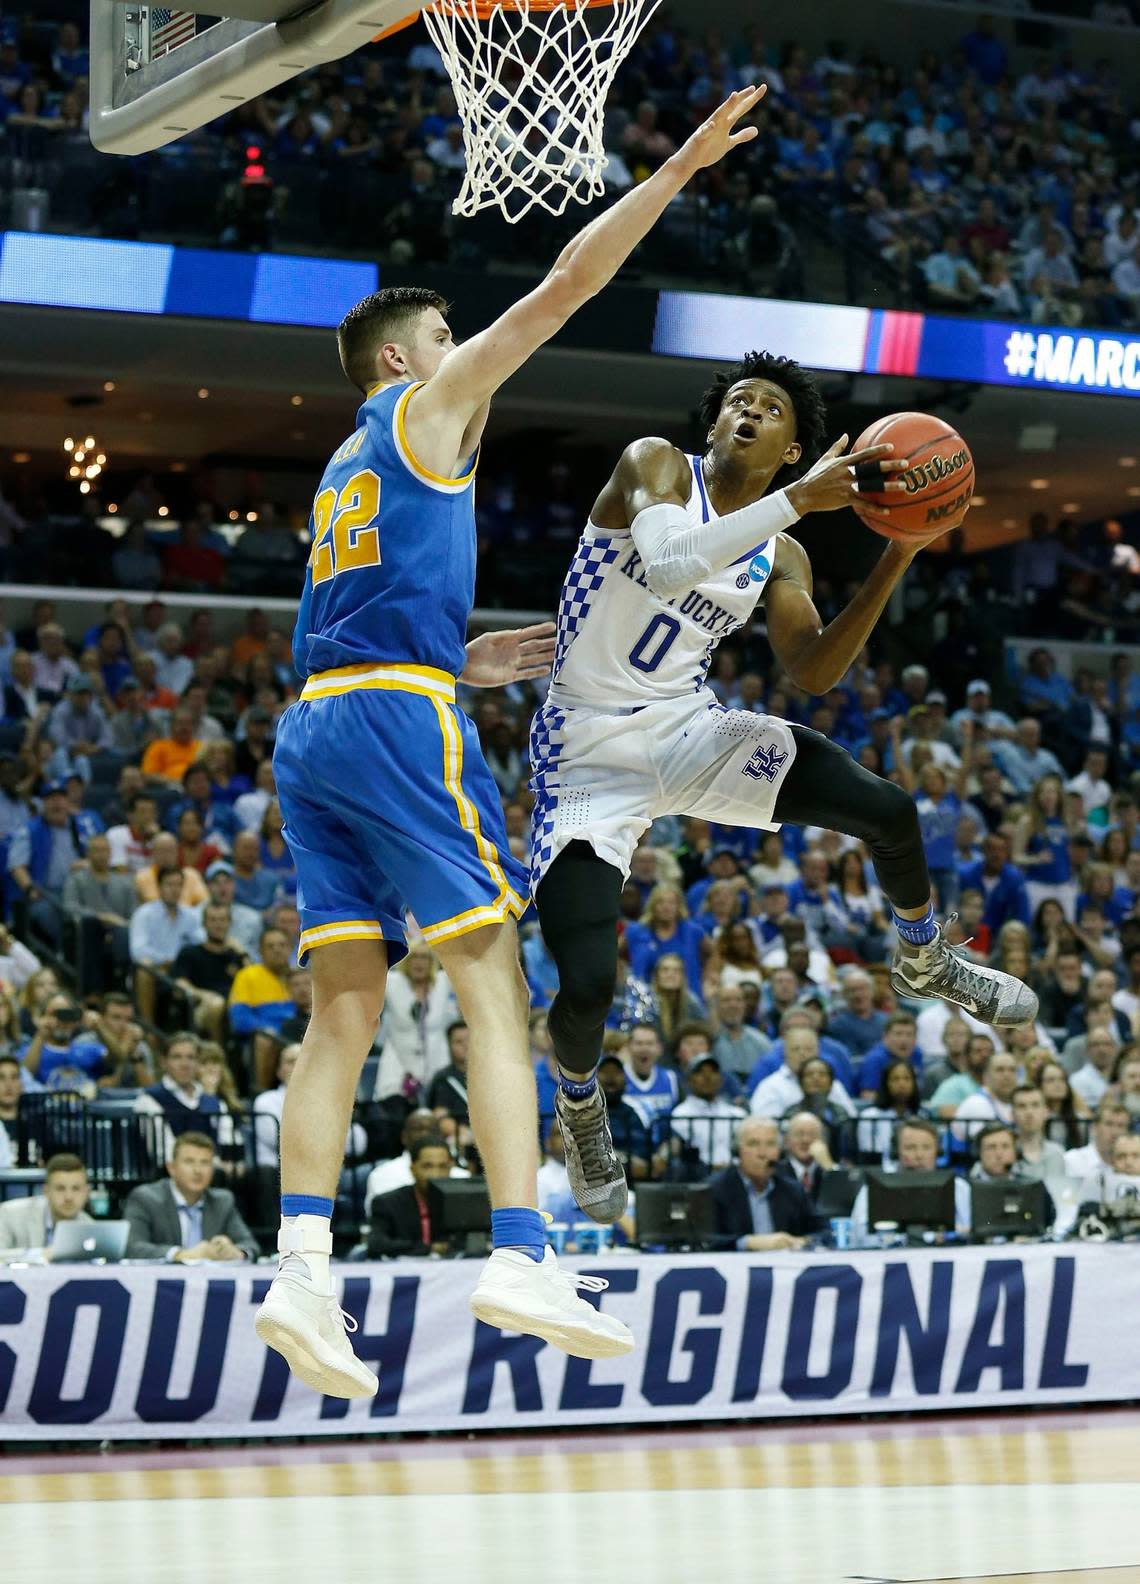 De’Aaron Fox (0) scored 39 points to lead Kentucky to an 86-75 win over UCLA in the NCAA Tournament South Regional at Memphis.